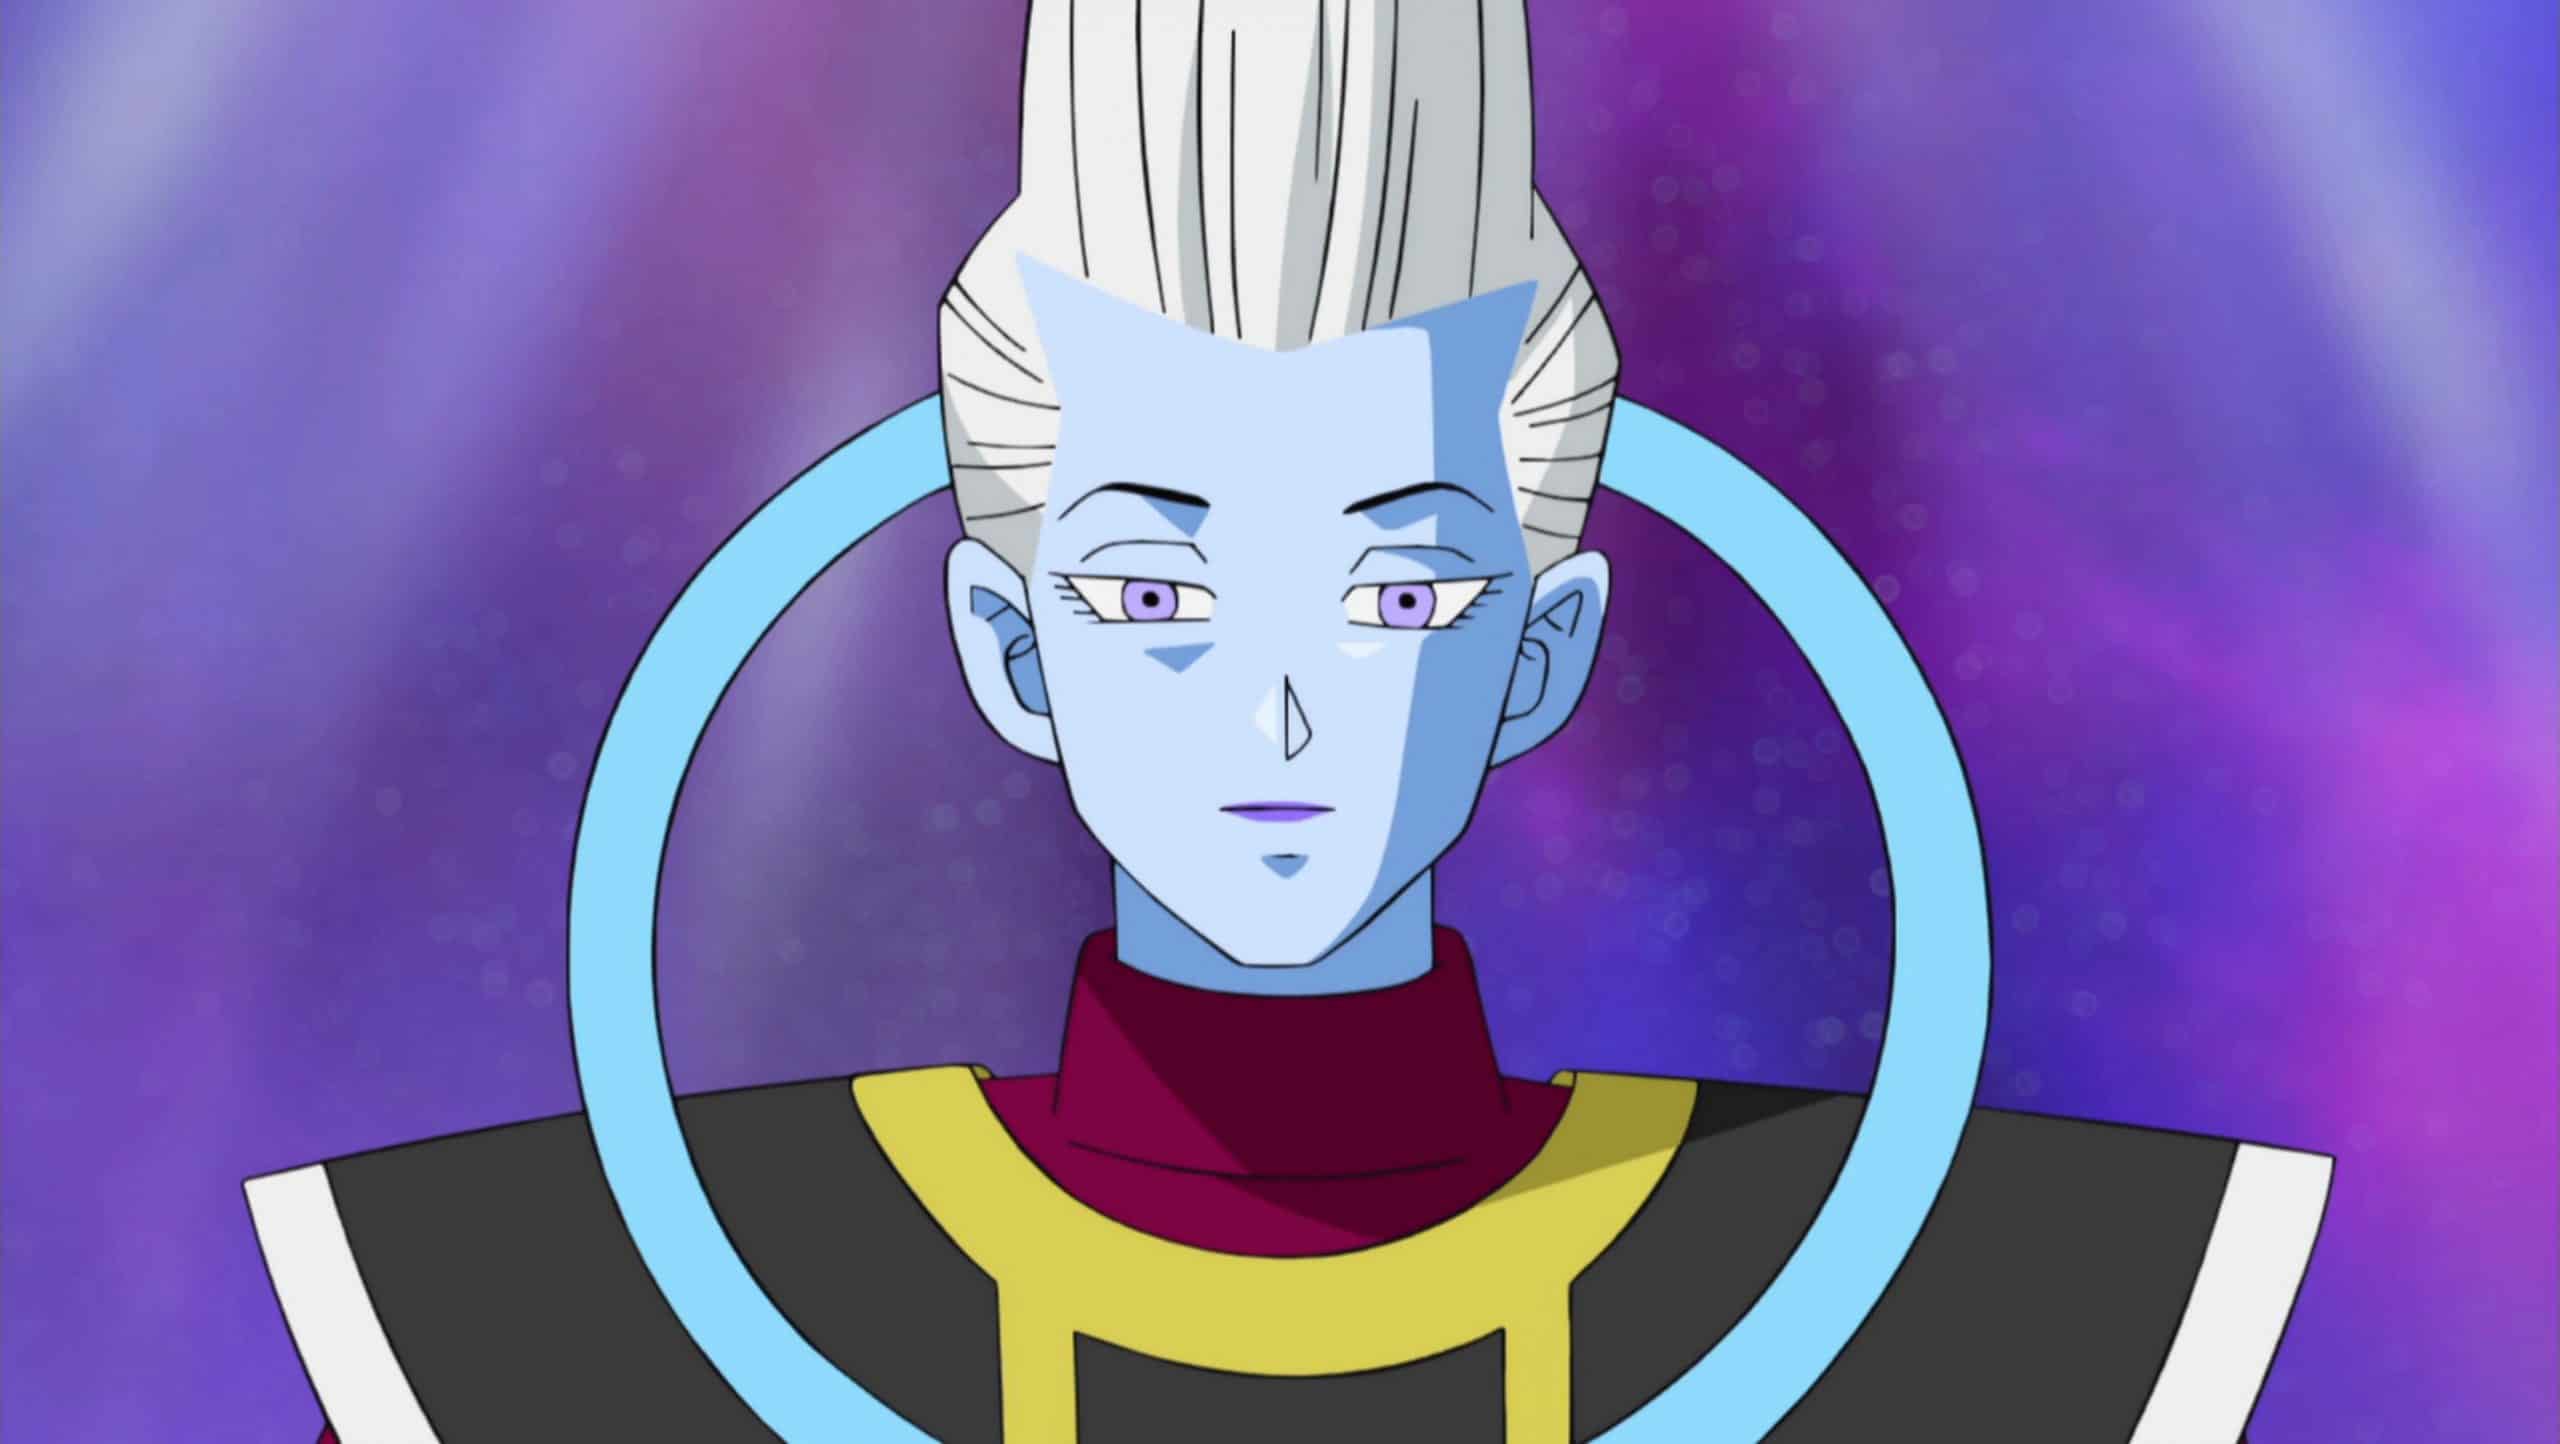 Angel Whis